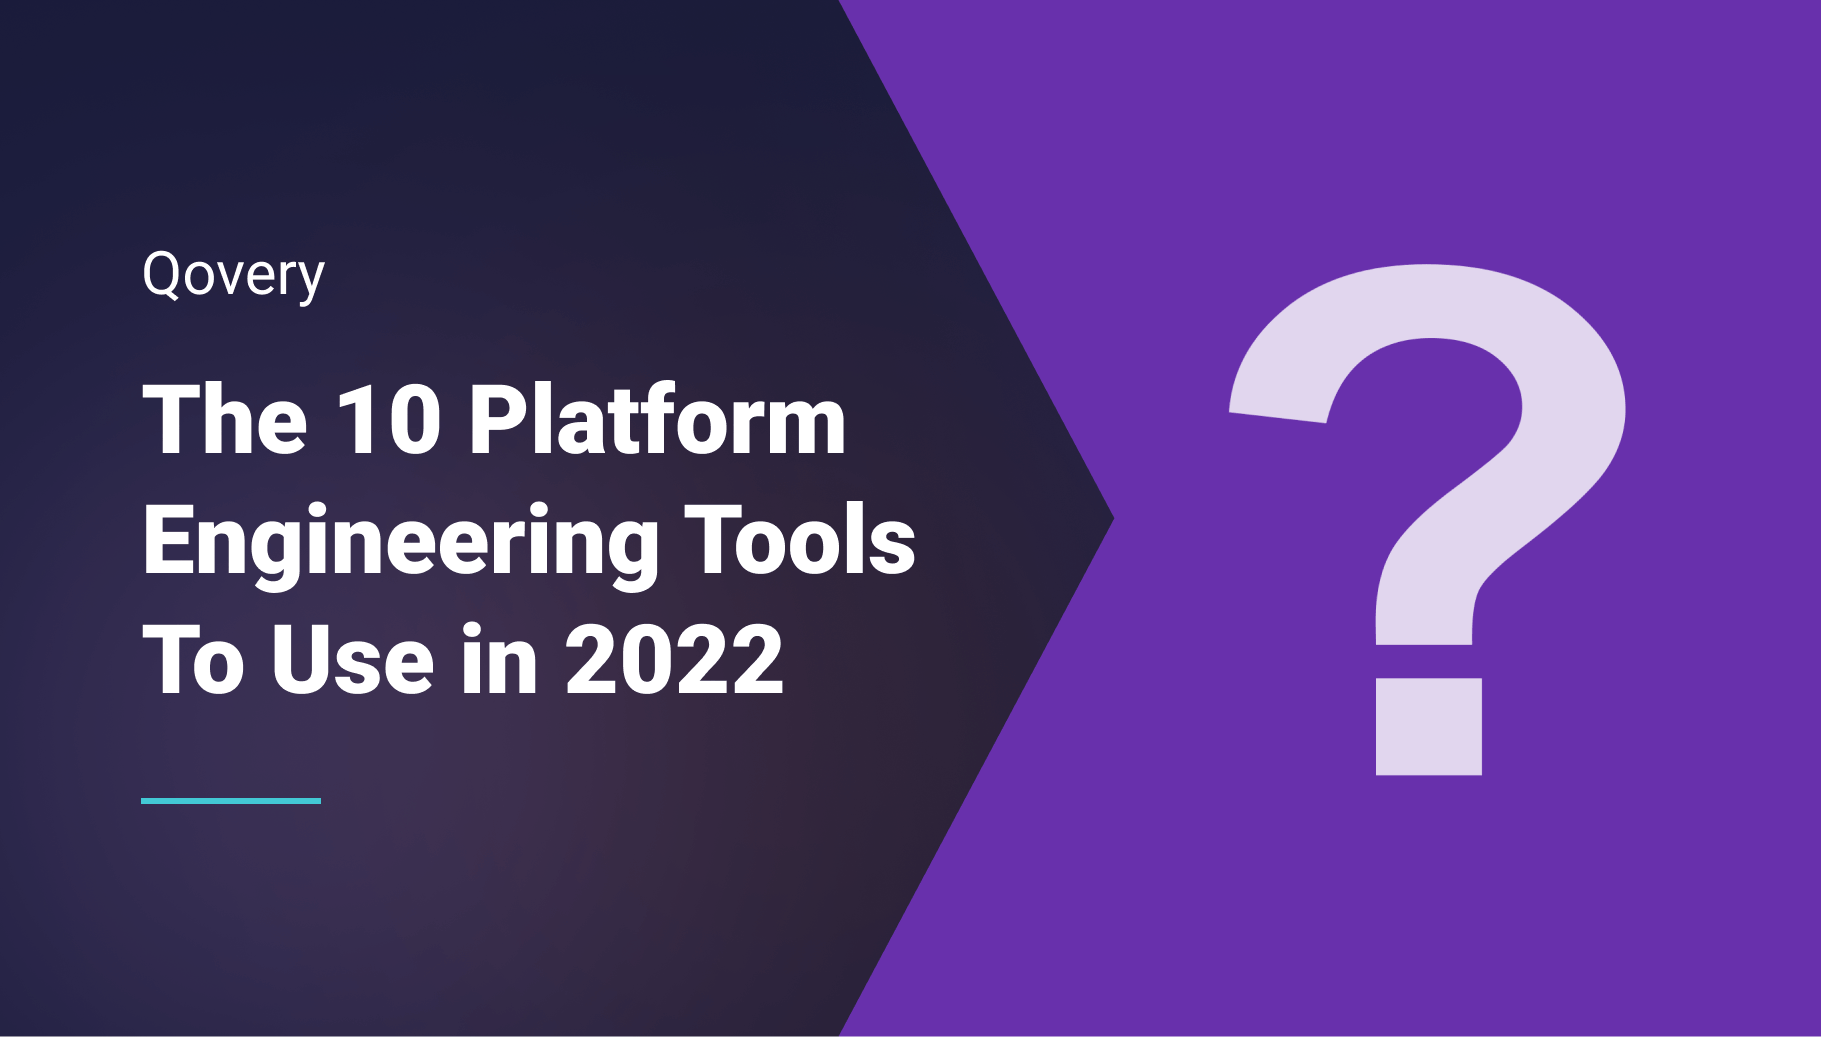 The 10 Platform Engineering Tools To Use in 2022